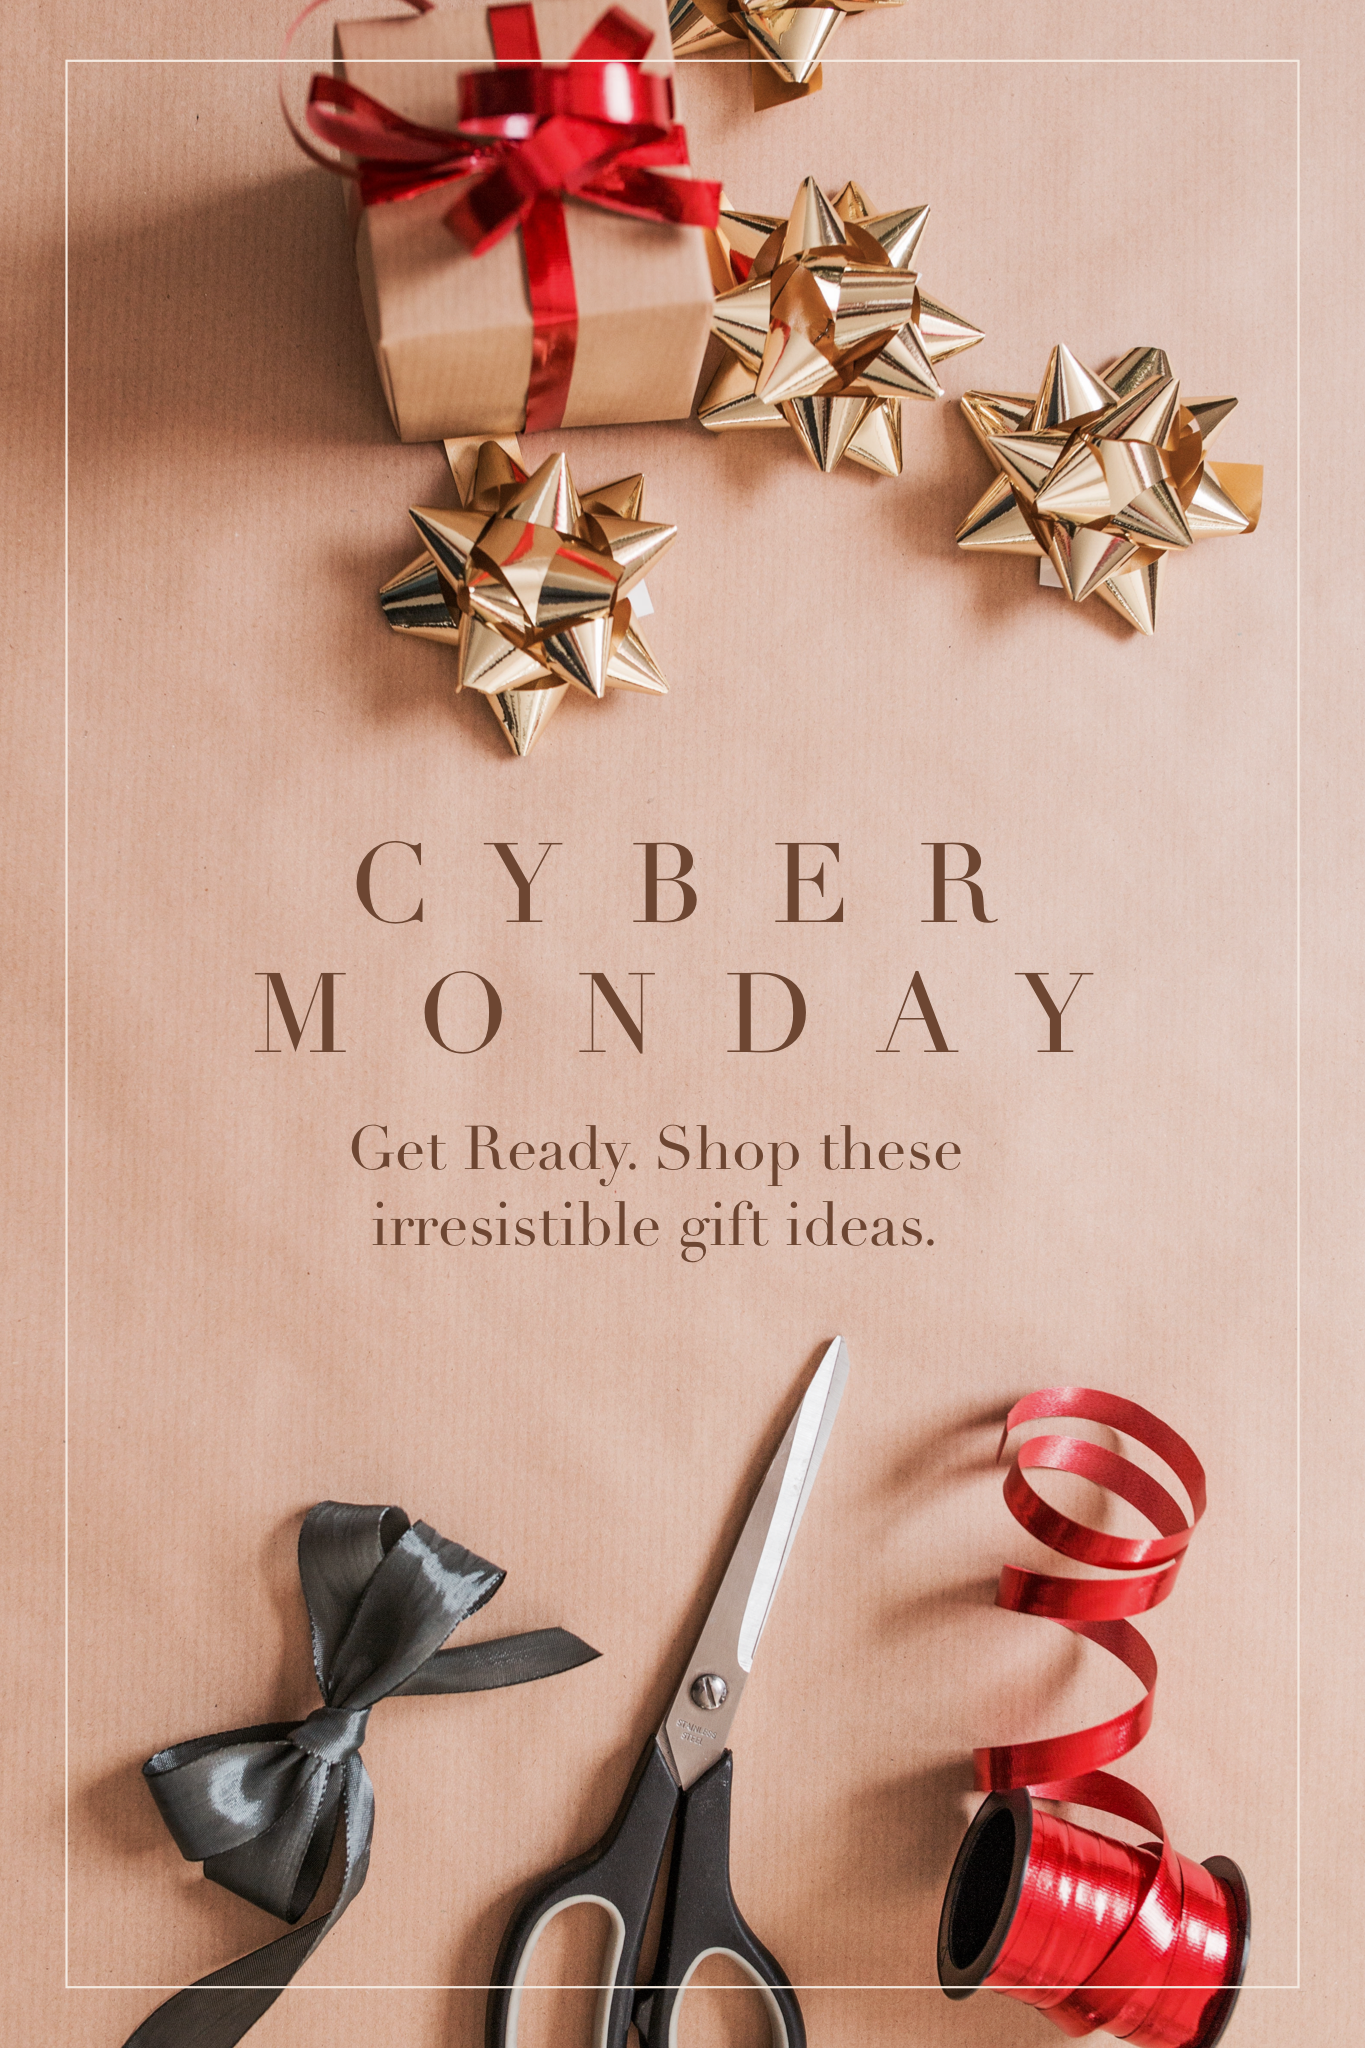 Get Back to Work and Get Shopping! Cyber Monday Is Here! It's the best day to grab those presents for everyone on your list and maybe something for yourself